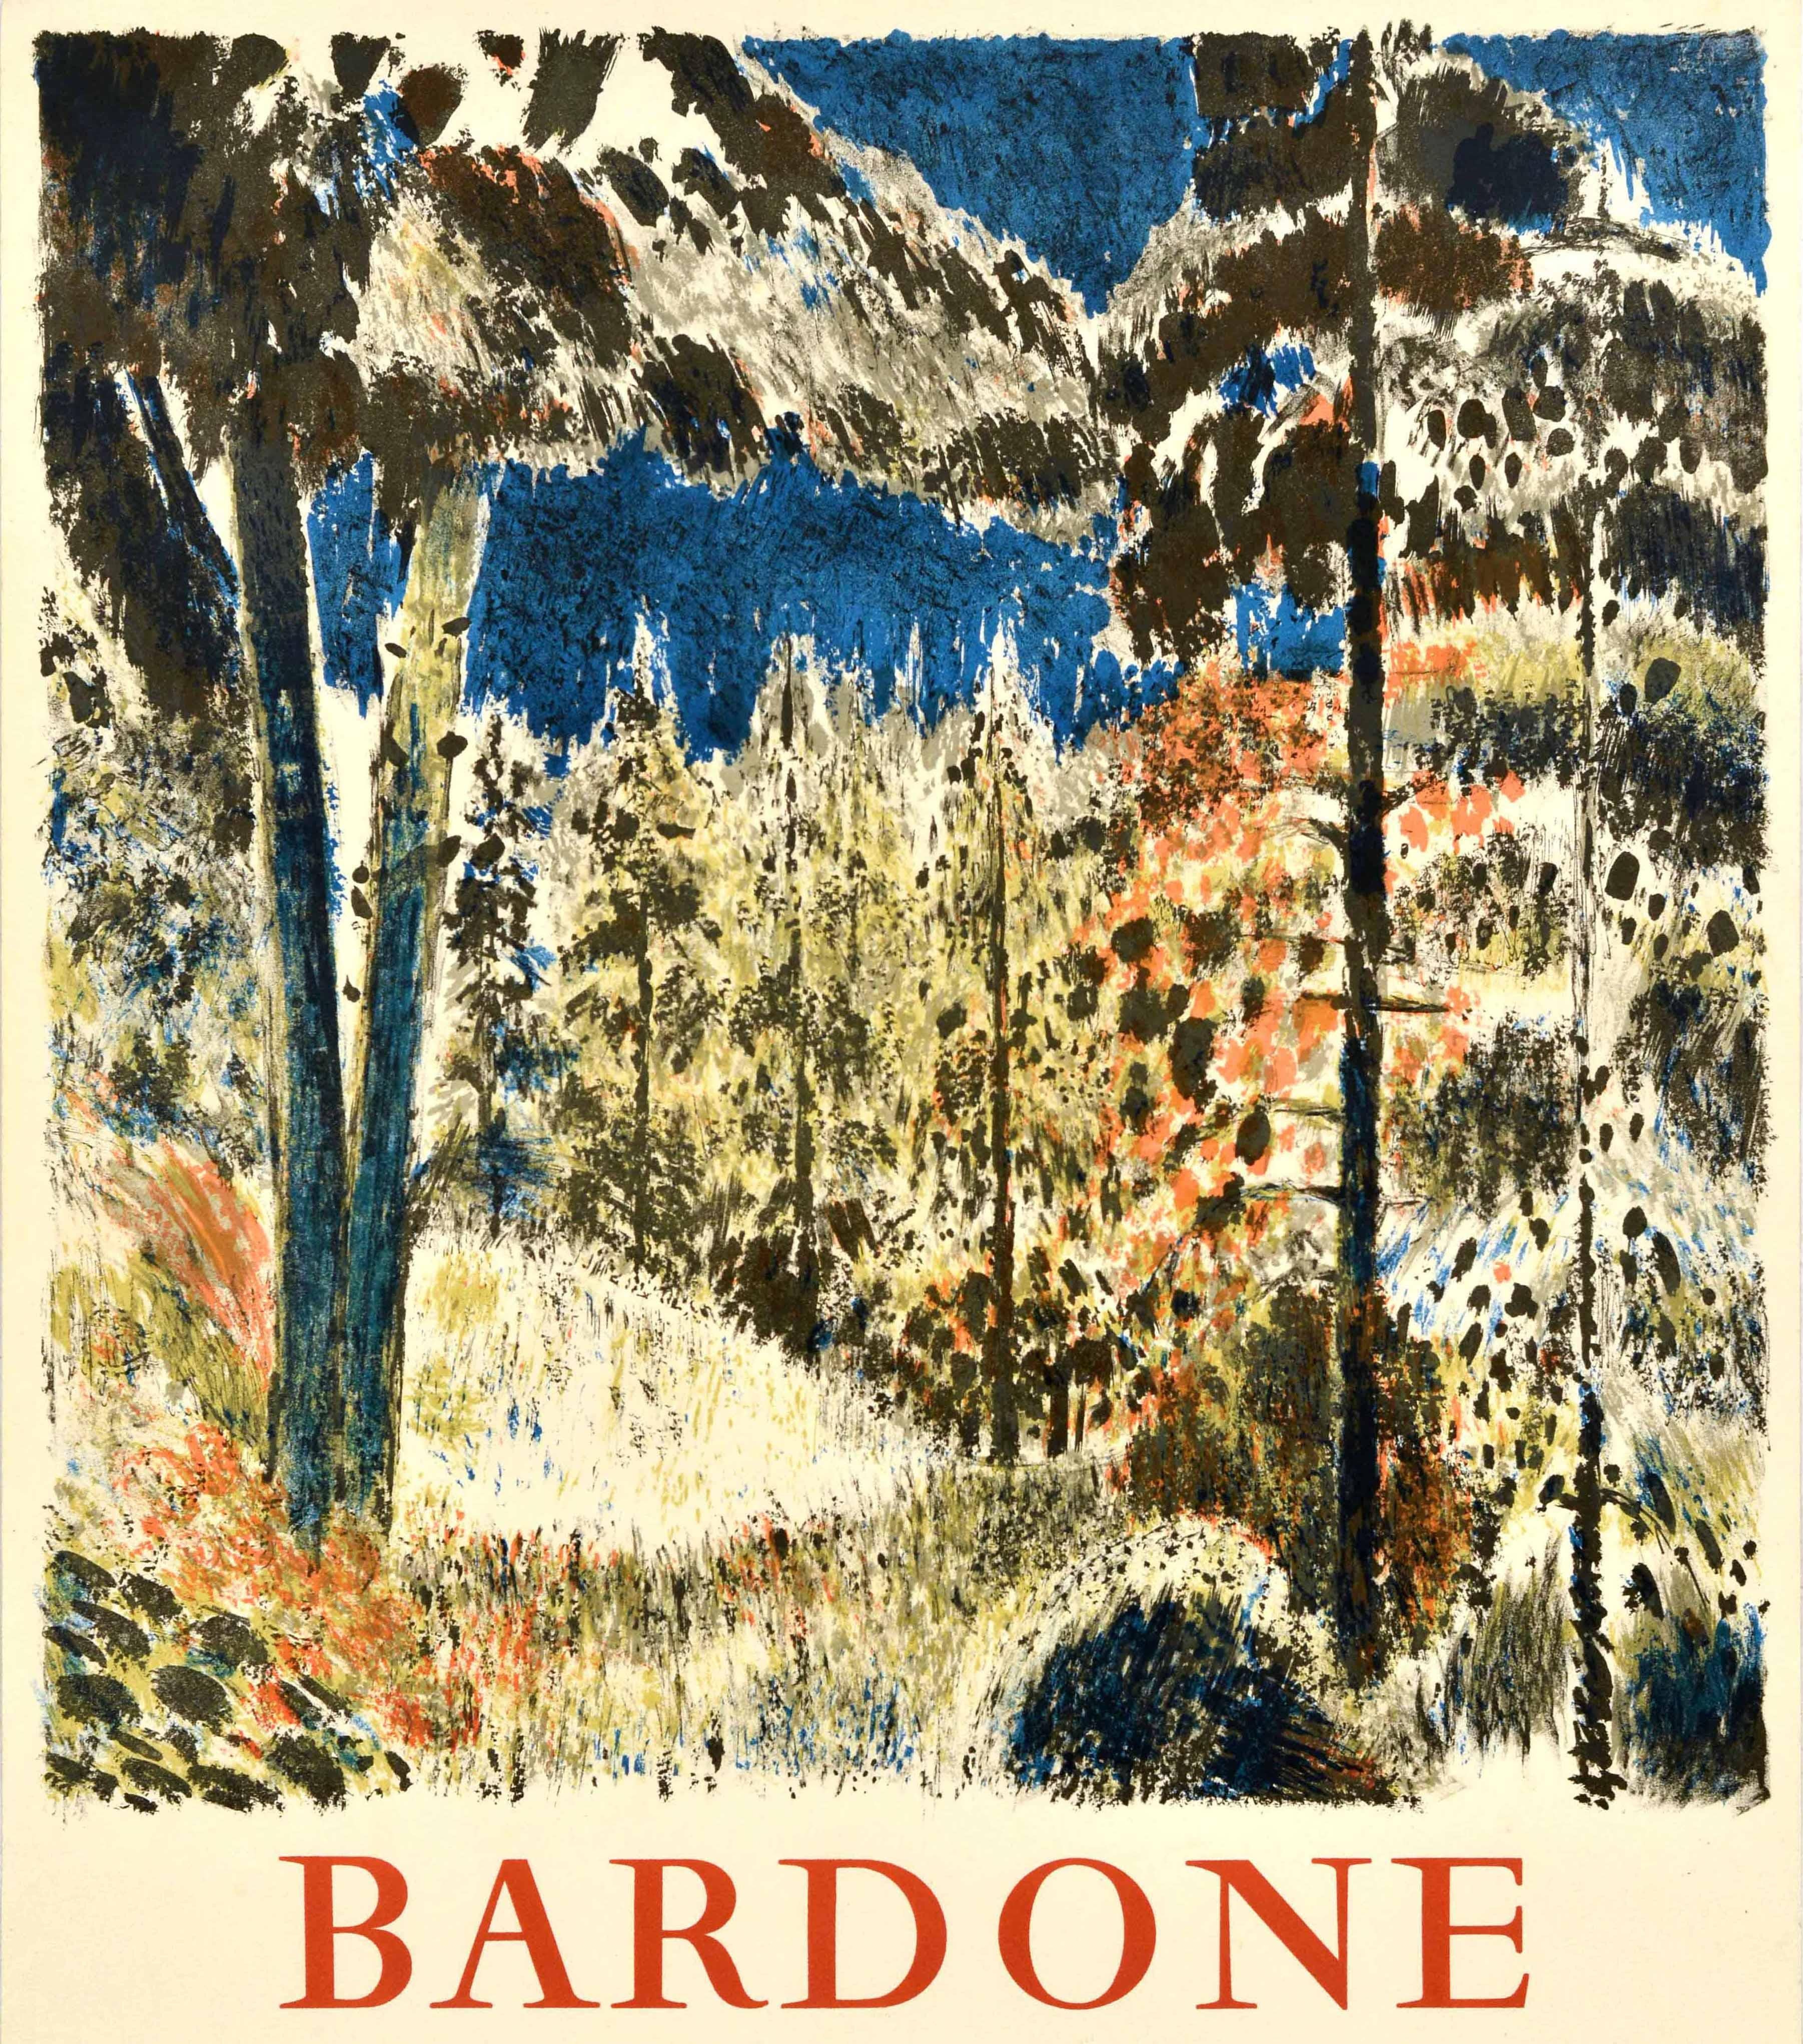 Original vintage art exhibition poster advertising Bardone Galerie Marcel Guiot Paris from 14 April to 6 May 1961 featuring scenic artwork by the French painter Guy Bardone (1927-2015) depicting a forest with tall trees on a hill with a dark blue